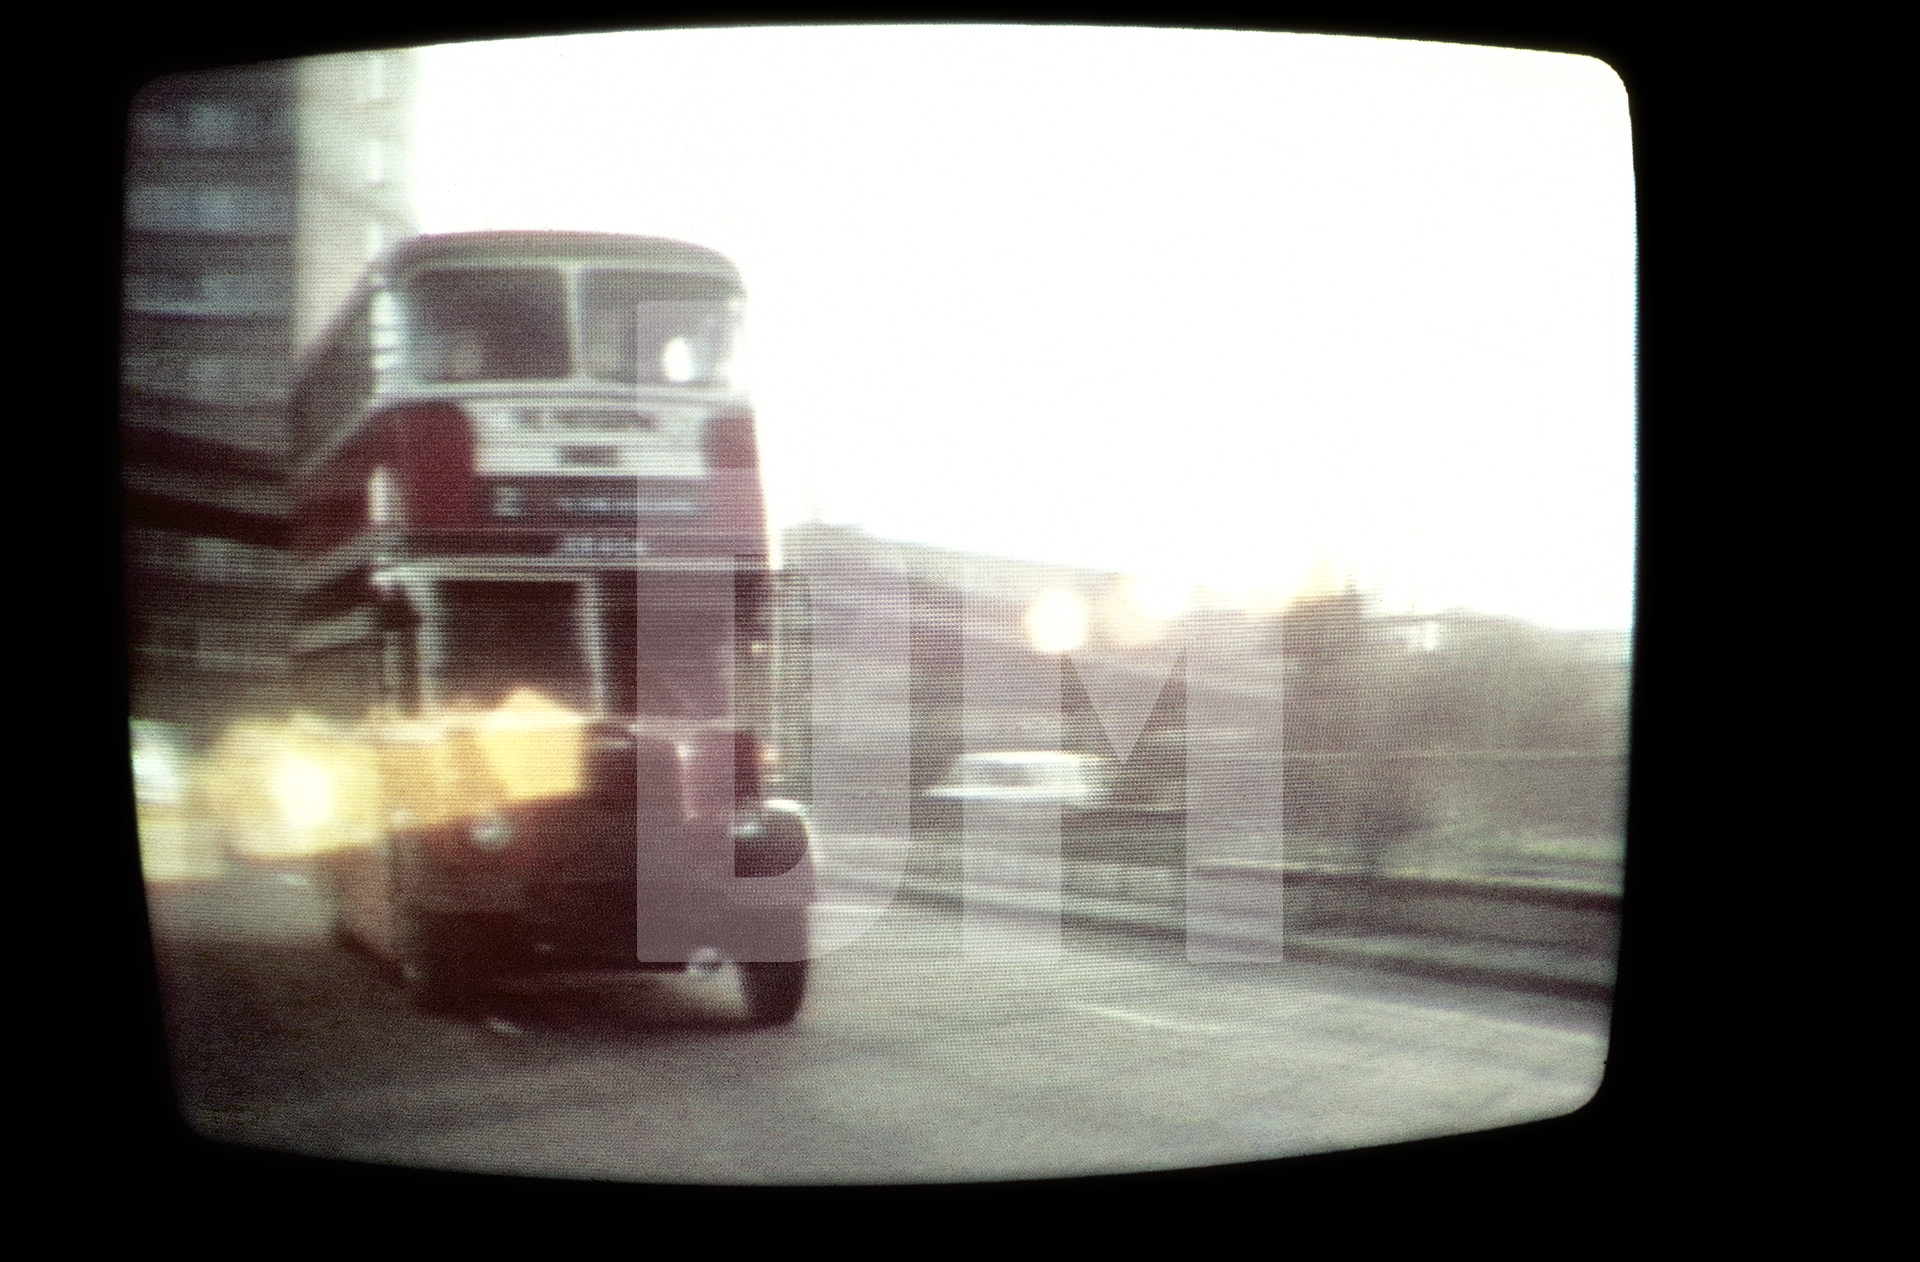 Free Photographic Omnibus as seen on TV, Granada Reports, Manchester. 7 February 1974 by Daniel Meadows